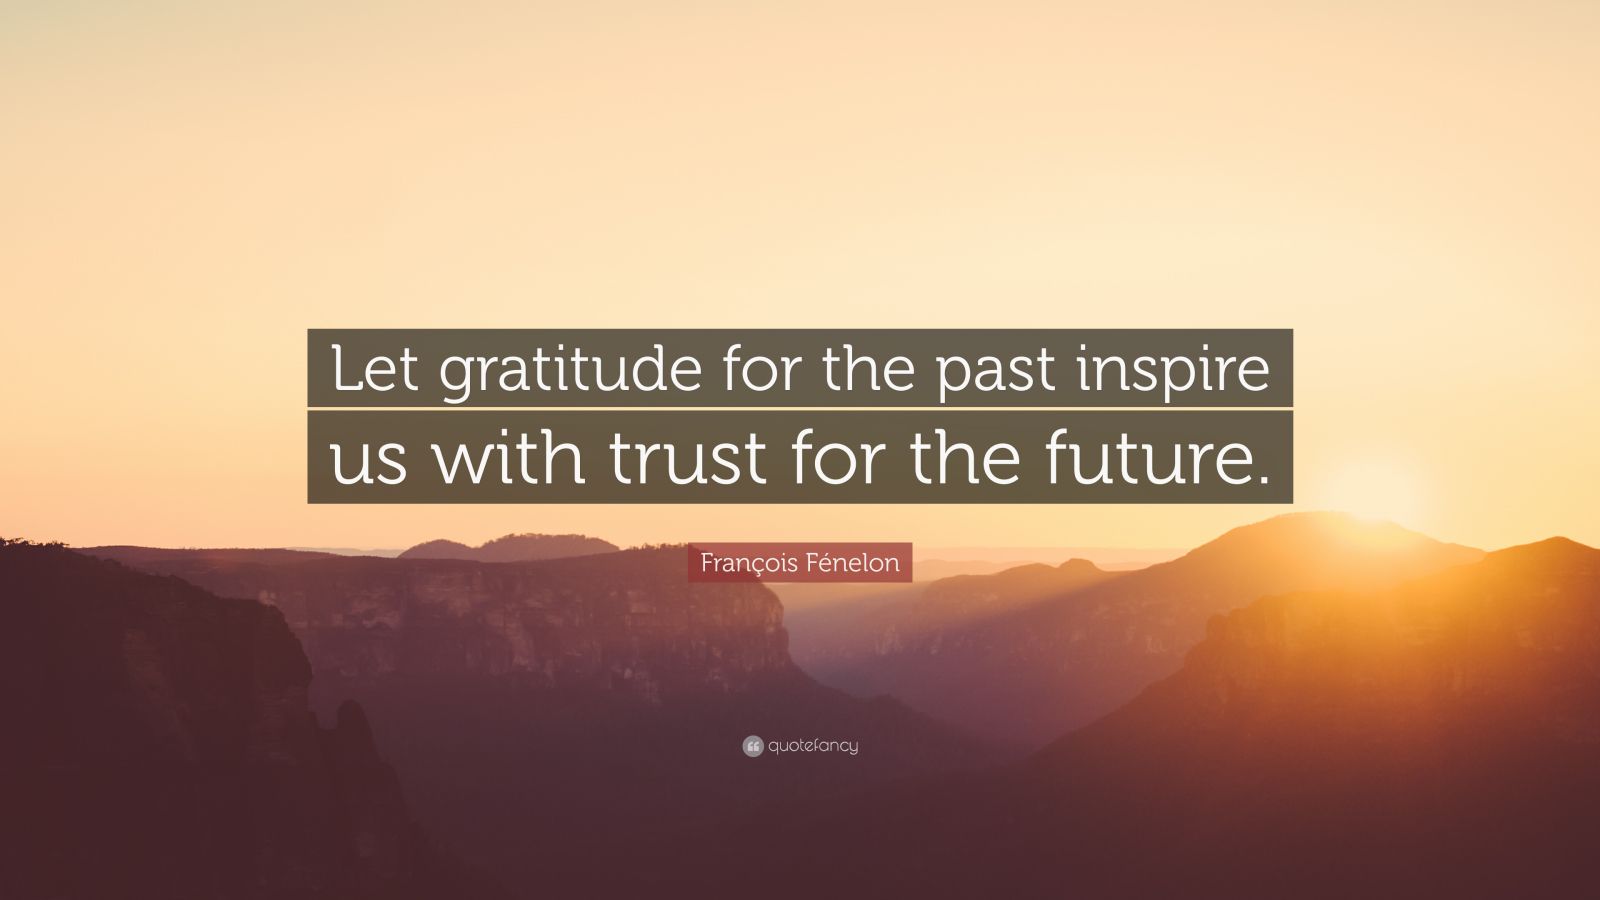 4205560 Fran ois F nelon Quote Let gratitude for the past inspire us with